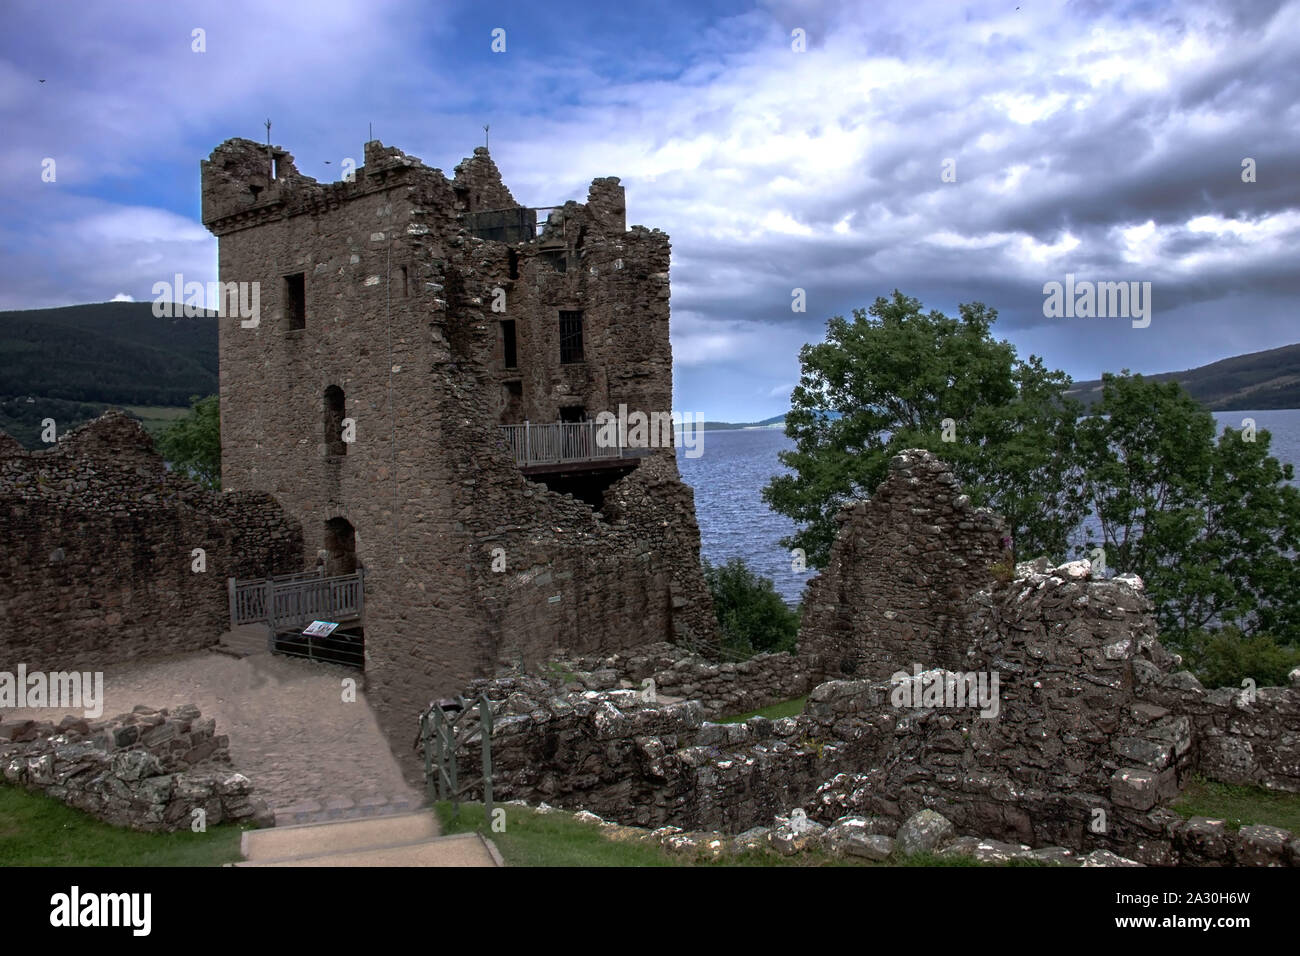 Urquhart Castle beside Loch Ness in the Highlands of Scotland. Drumnadrochit, Inverness -shire. Stock Photo